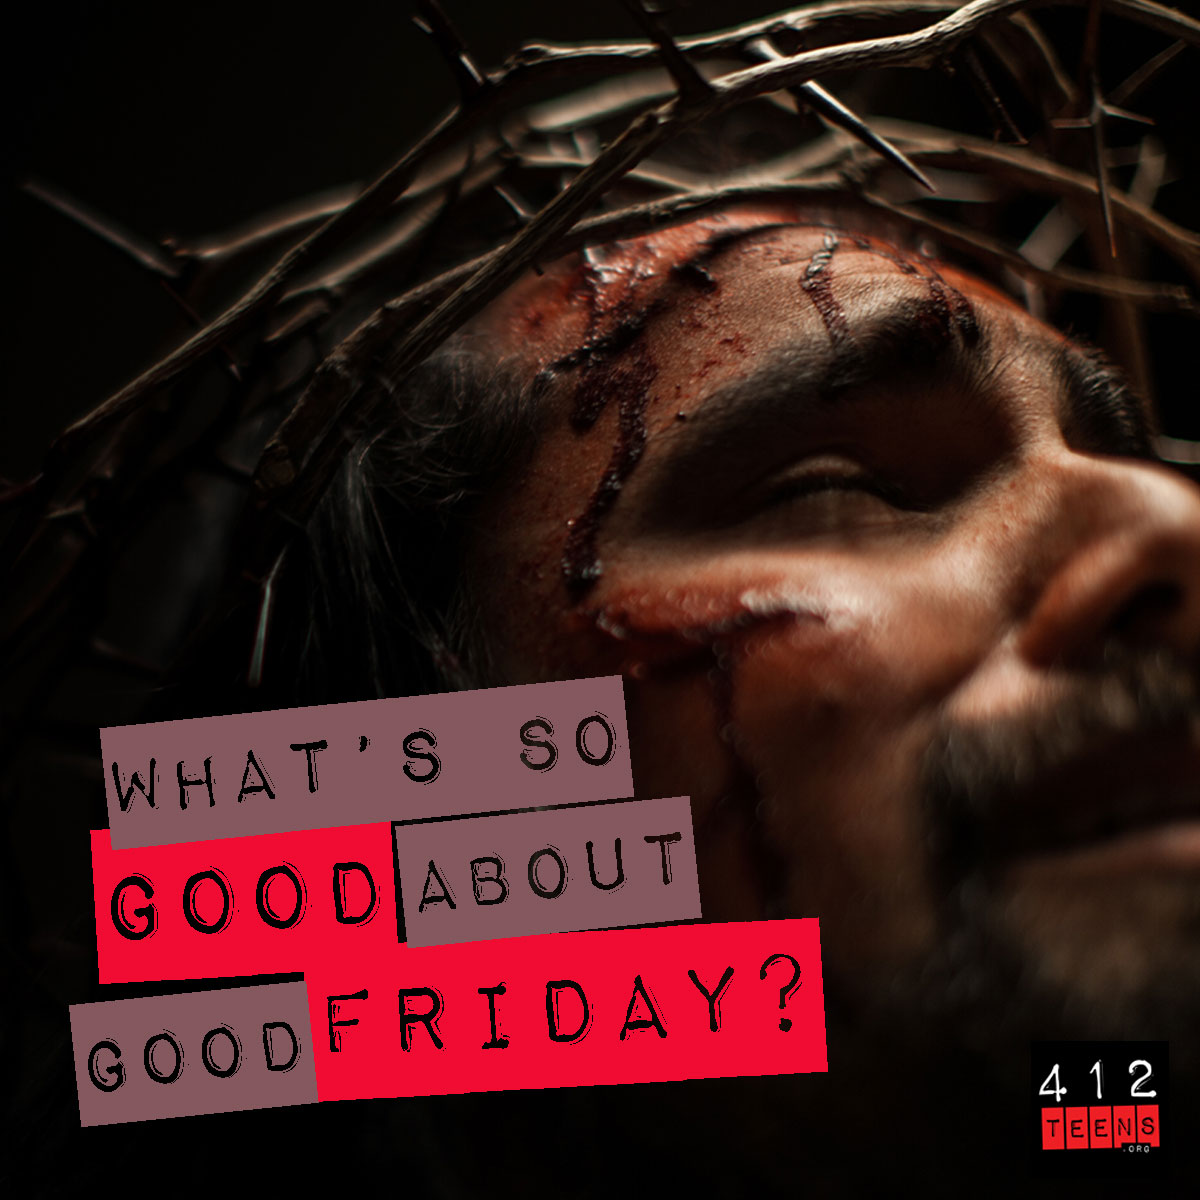 What is Good Friday / Holy Friday?